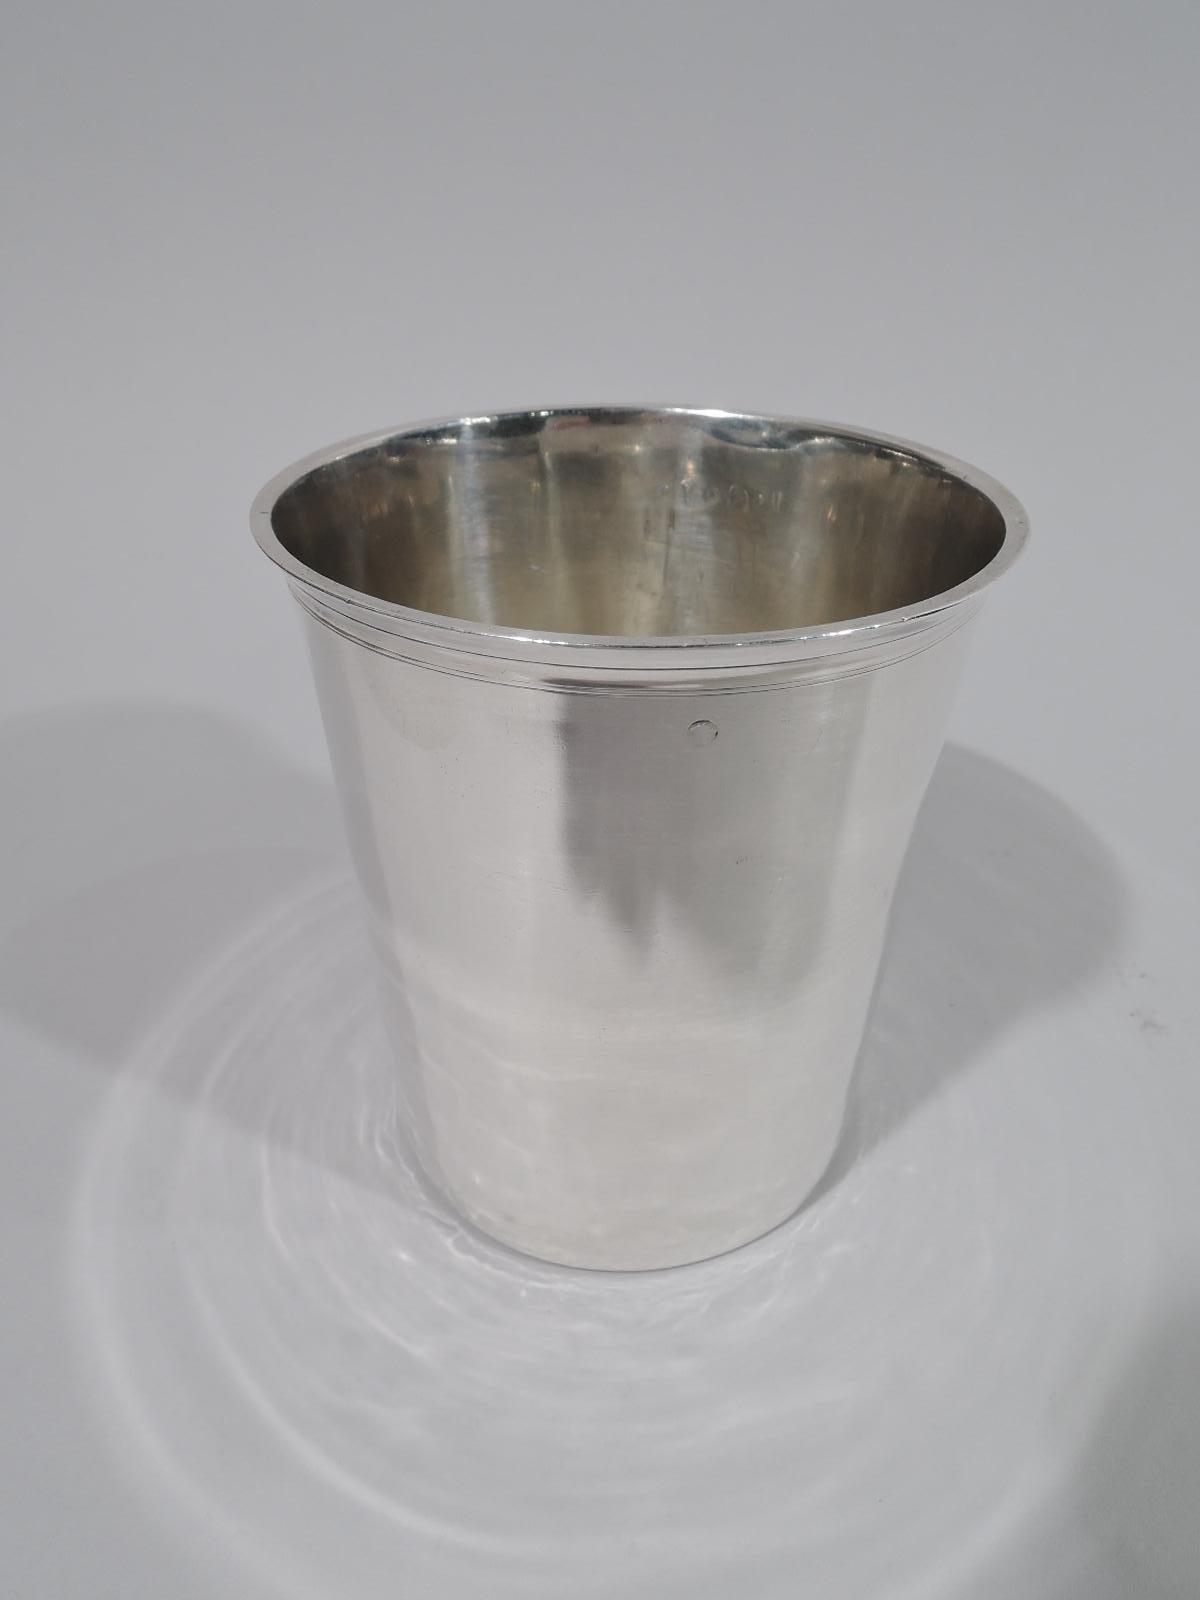 French Restauration silver beaker, circa 1820. Straight and tapering sides. and flared and flat rim. Engraved near rim are the initials L.G.J. Fully marked with Hippocrates head and maker’s stamp for Theodor Tonnelier, who was active in Paris